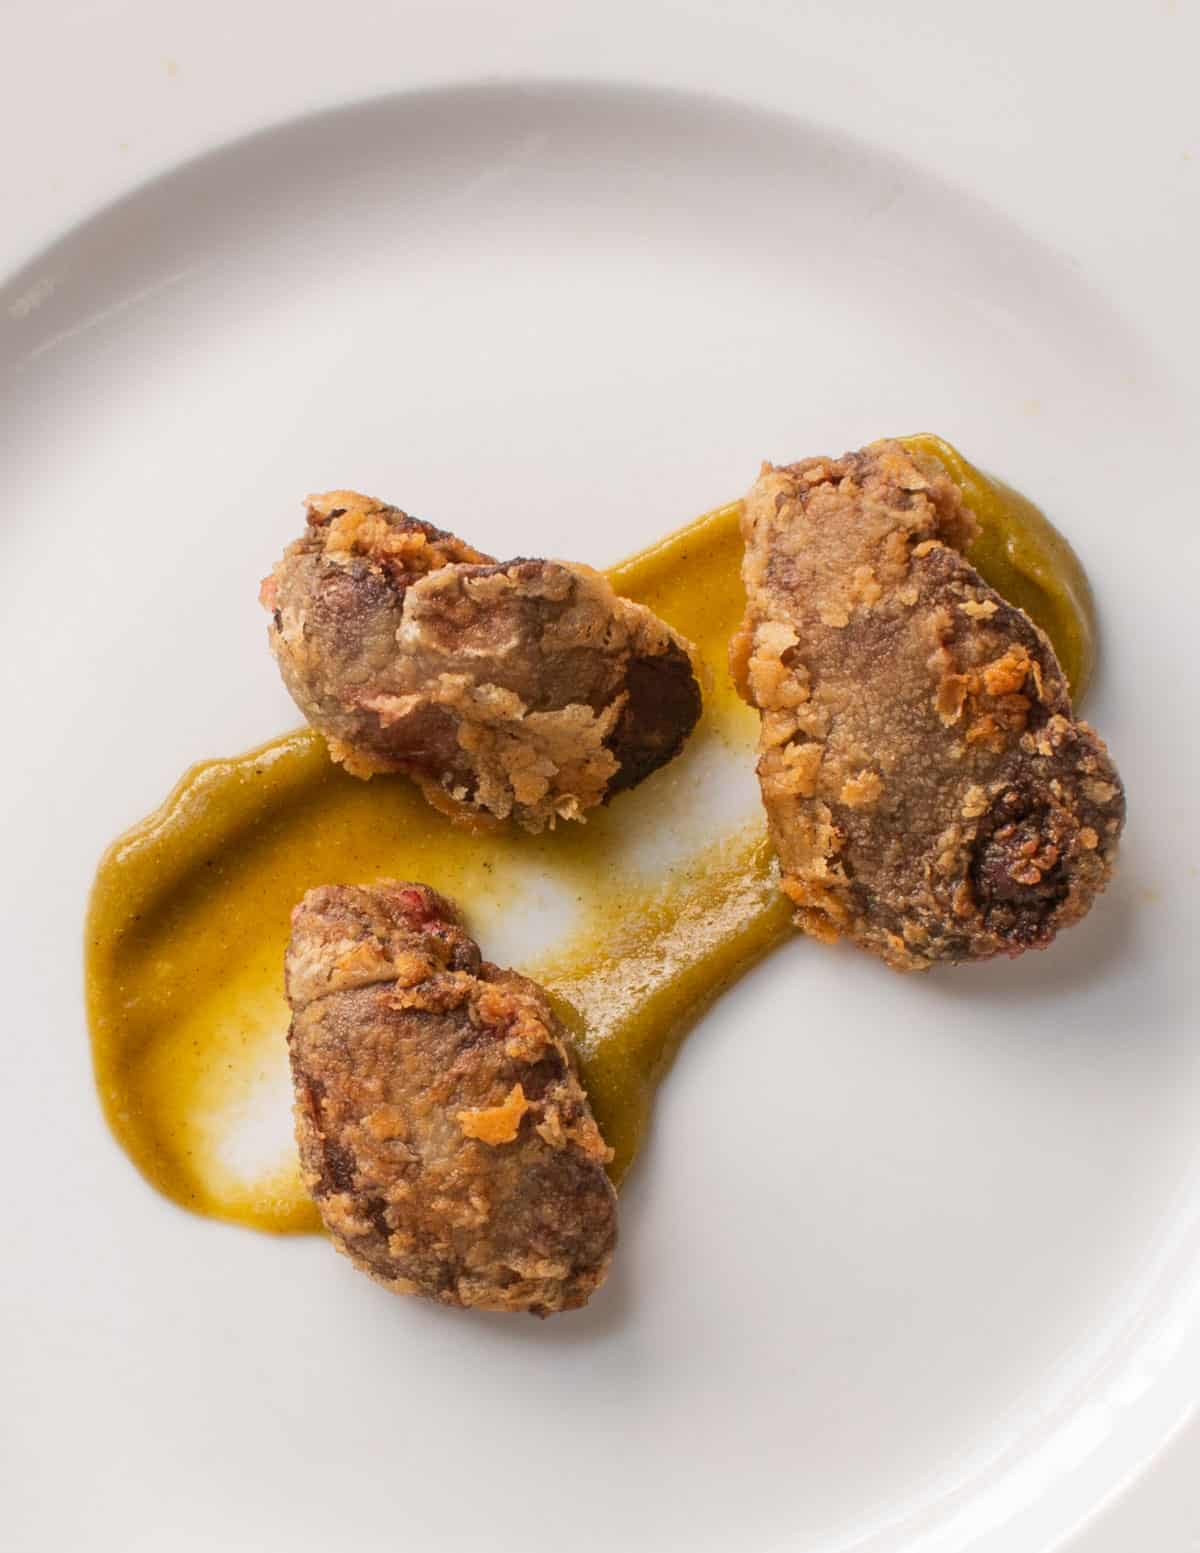 fried chicken livers with green tomato jam on a plate